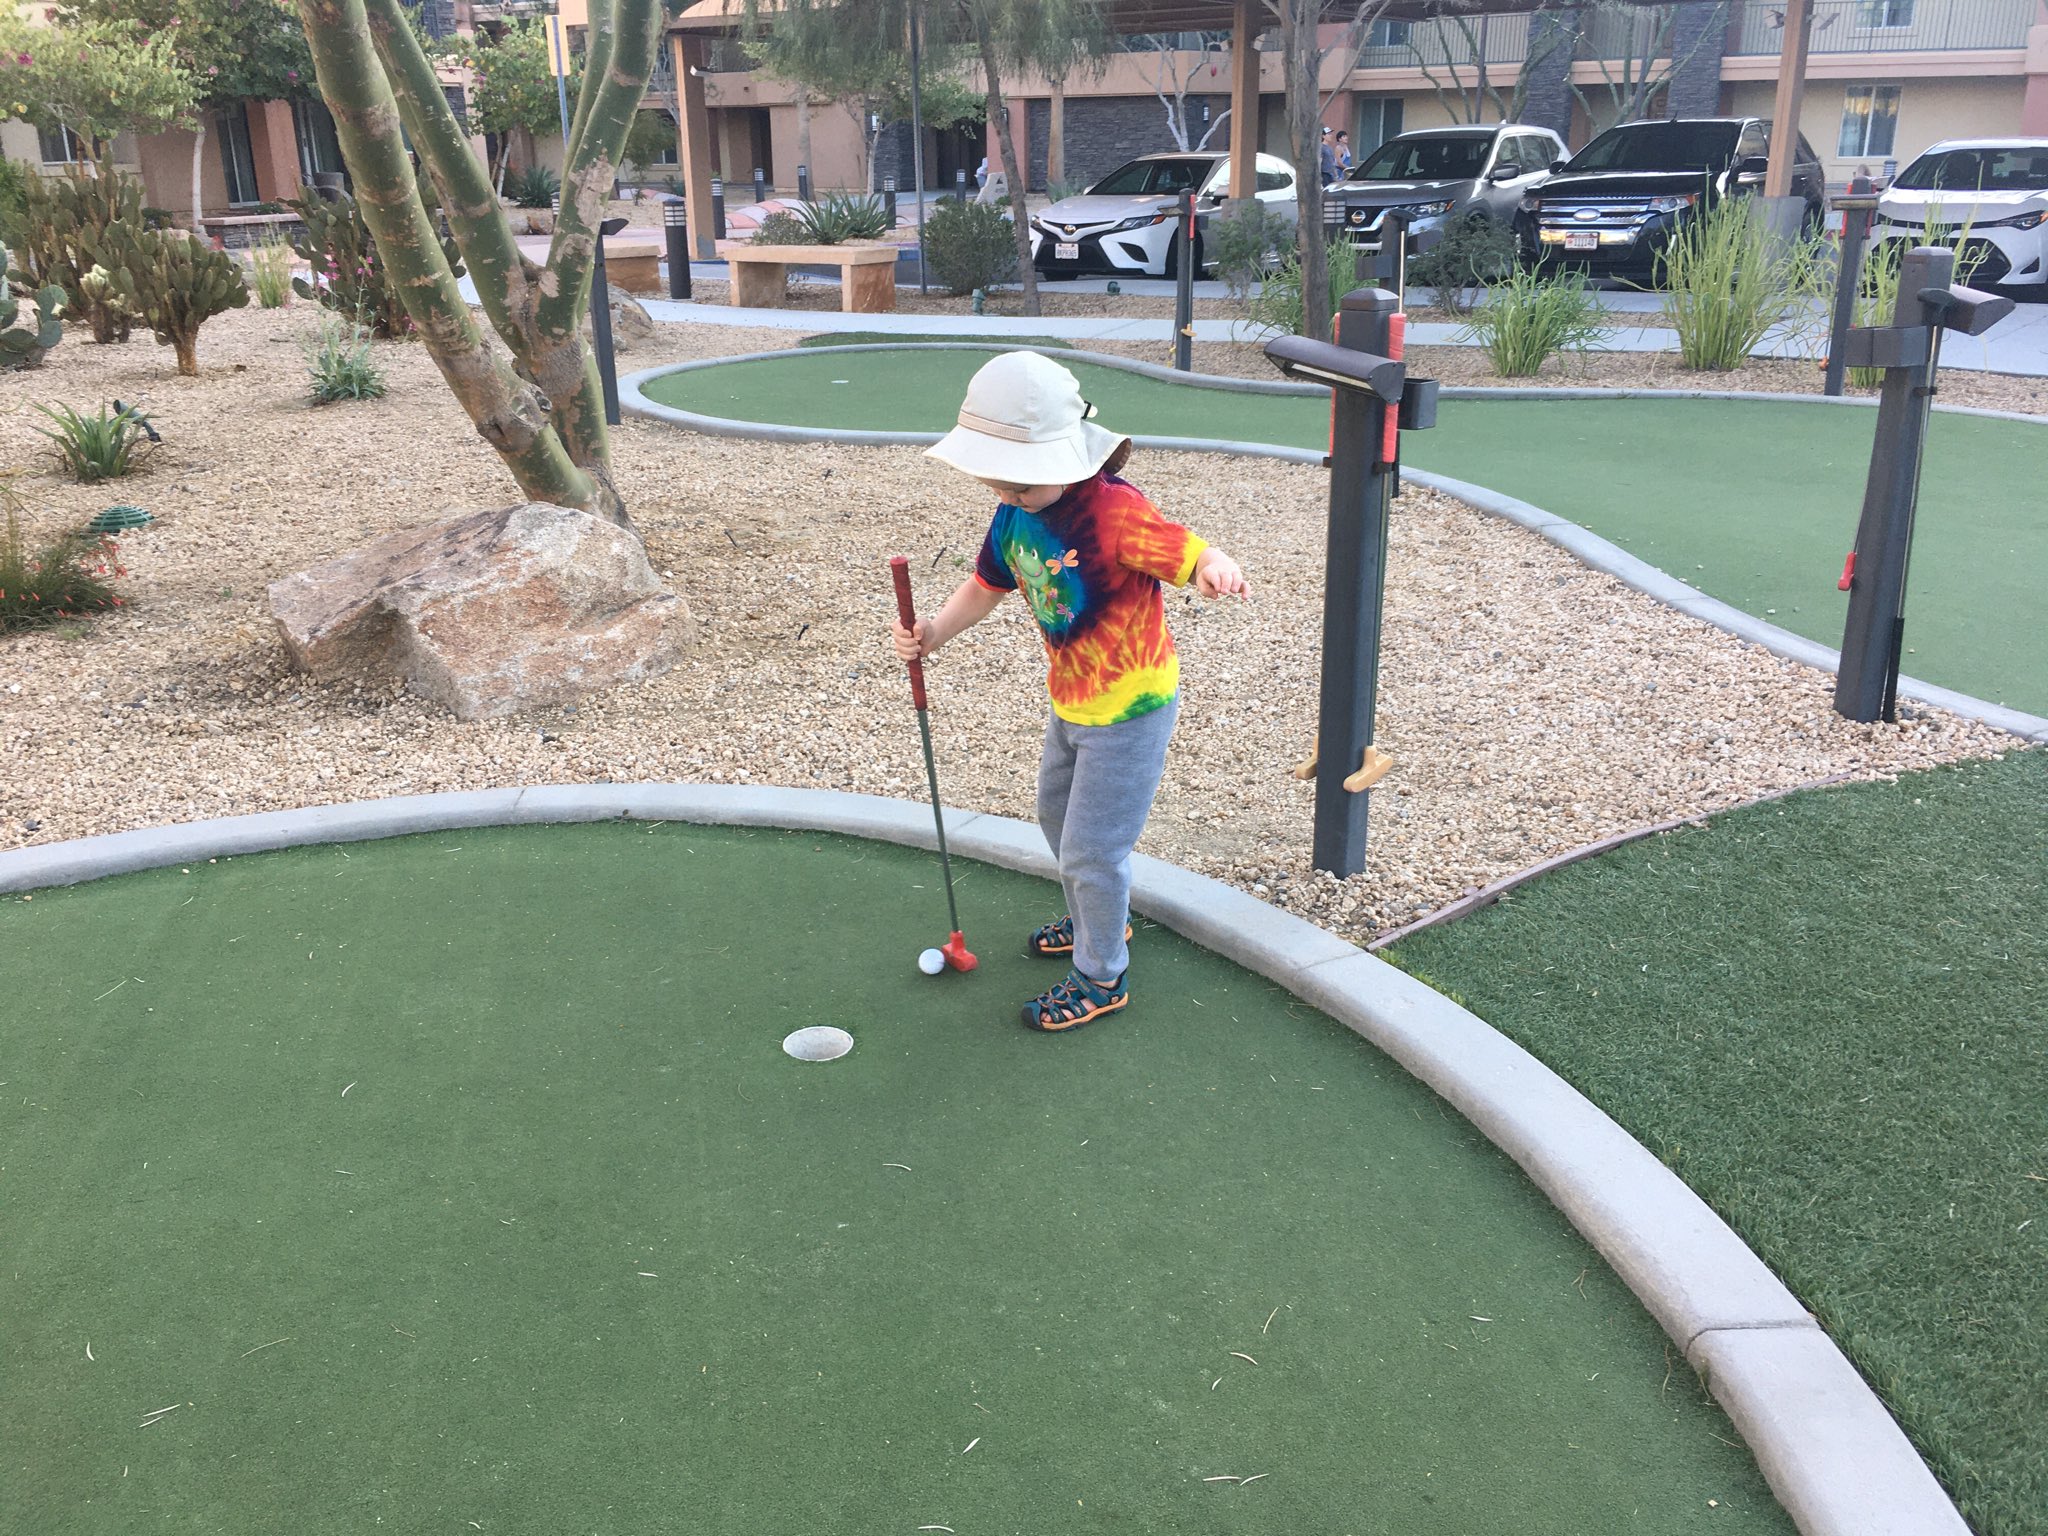 Julian, in a tie-dye shirt and white sun hat, holding a golf putter with his right hand and trying to get a golf ball into a hole.